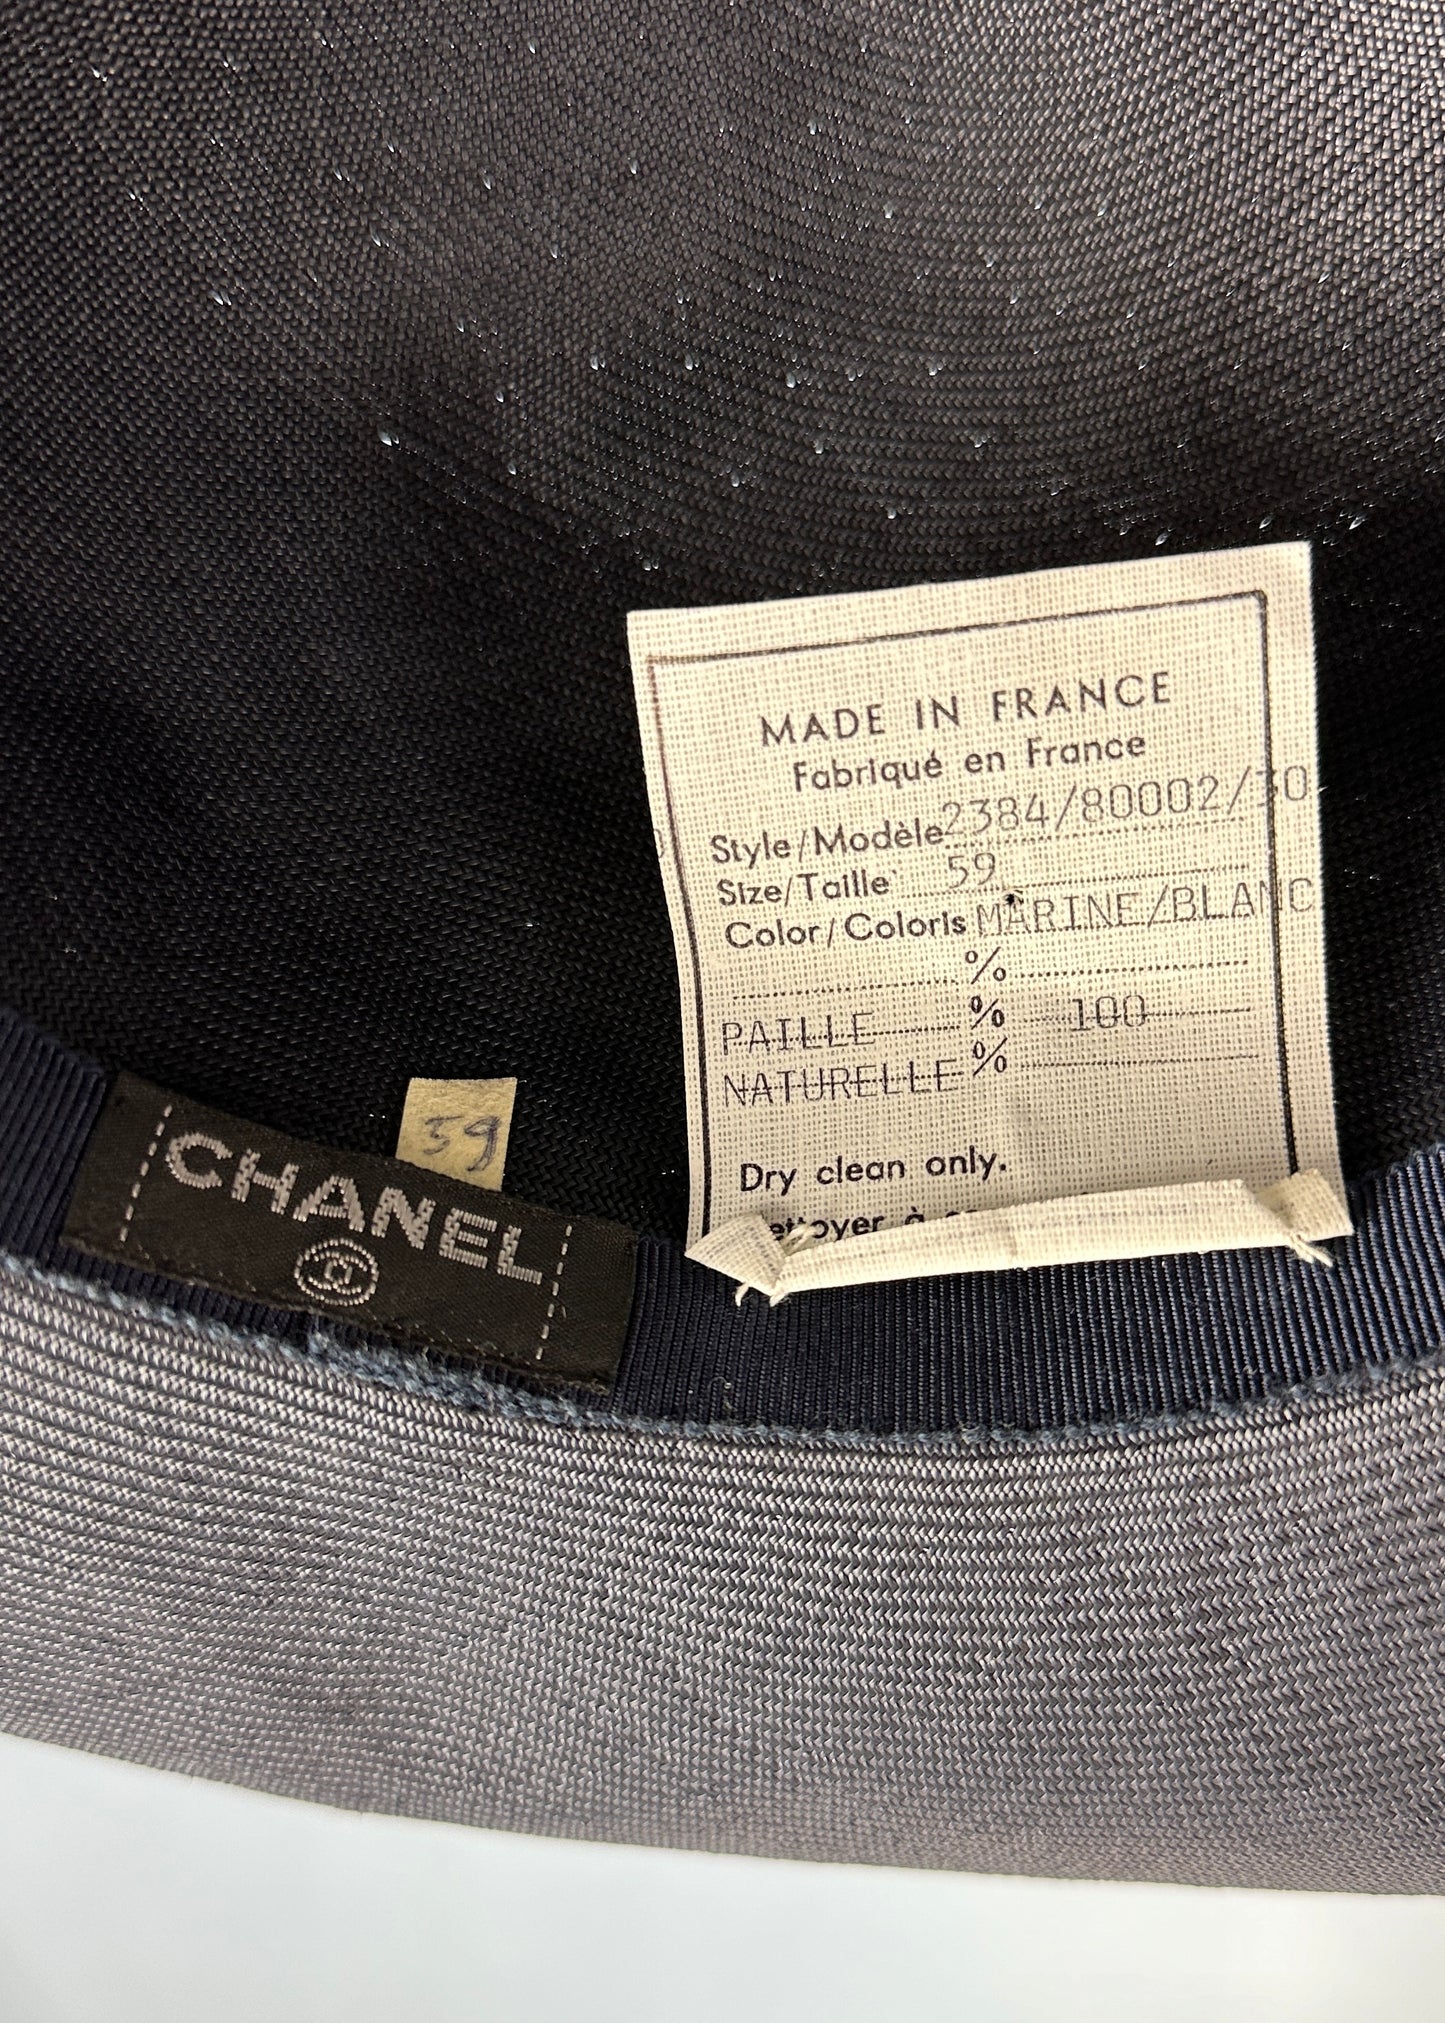 Chanel Early 90’s Navy & White Woven Hat